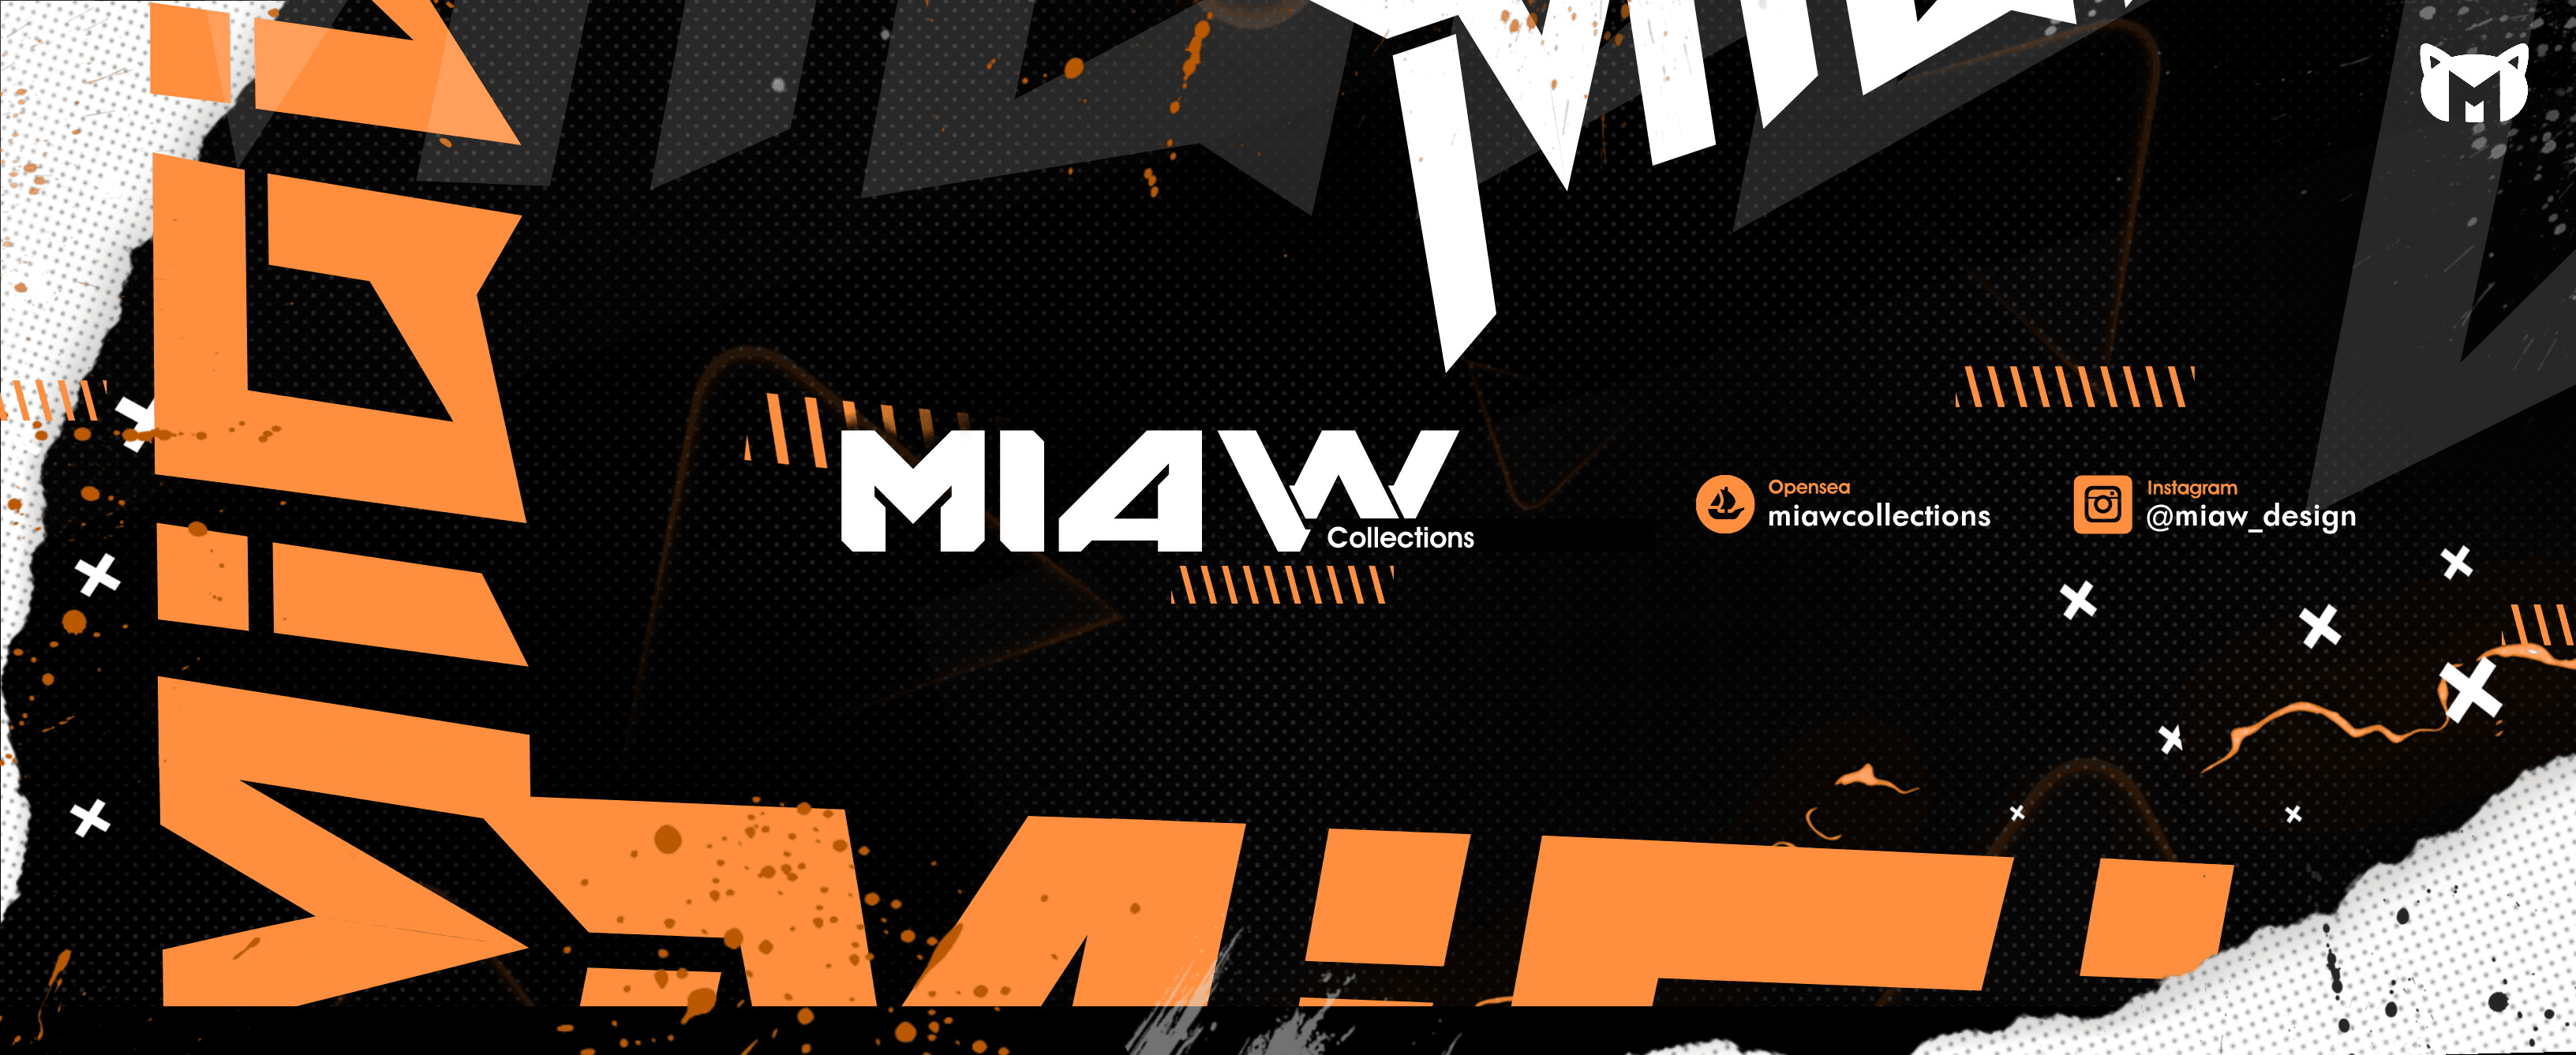 miawcollections banner